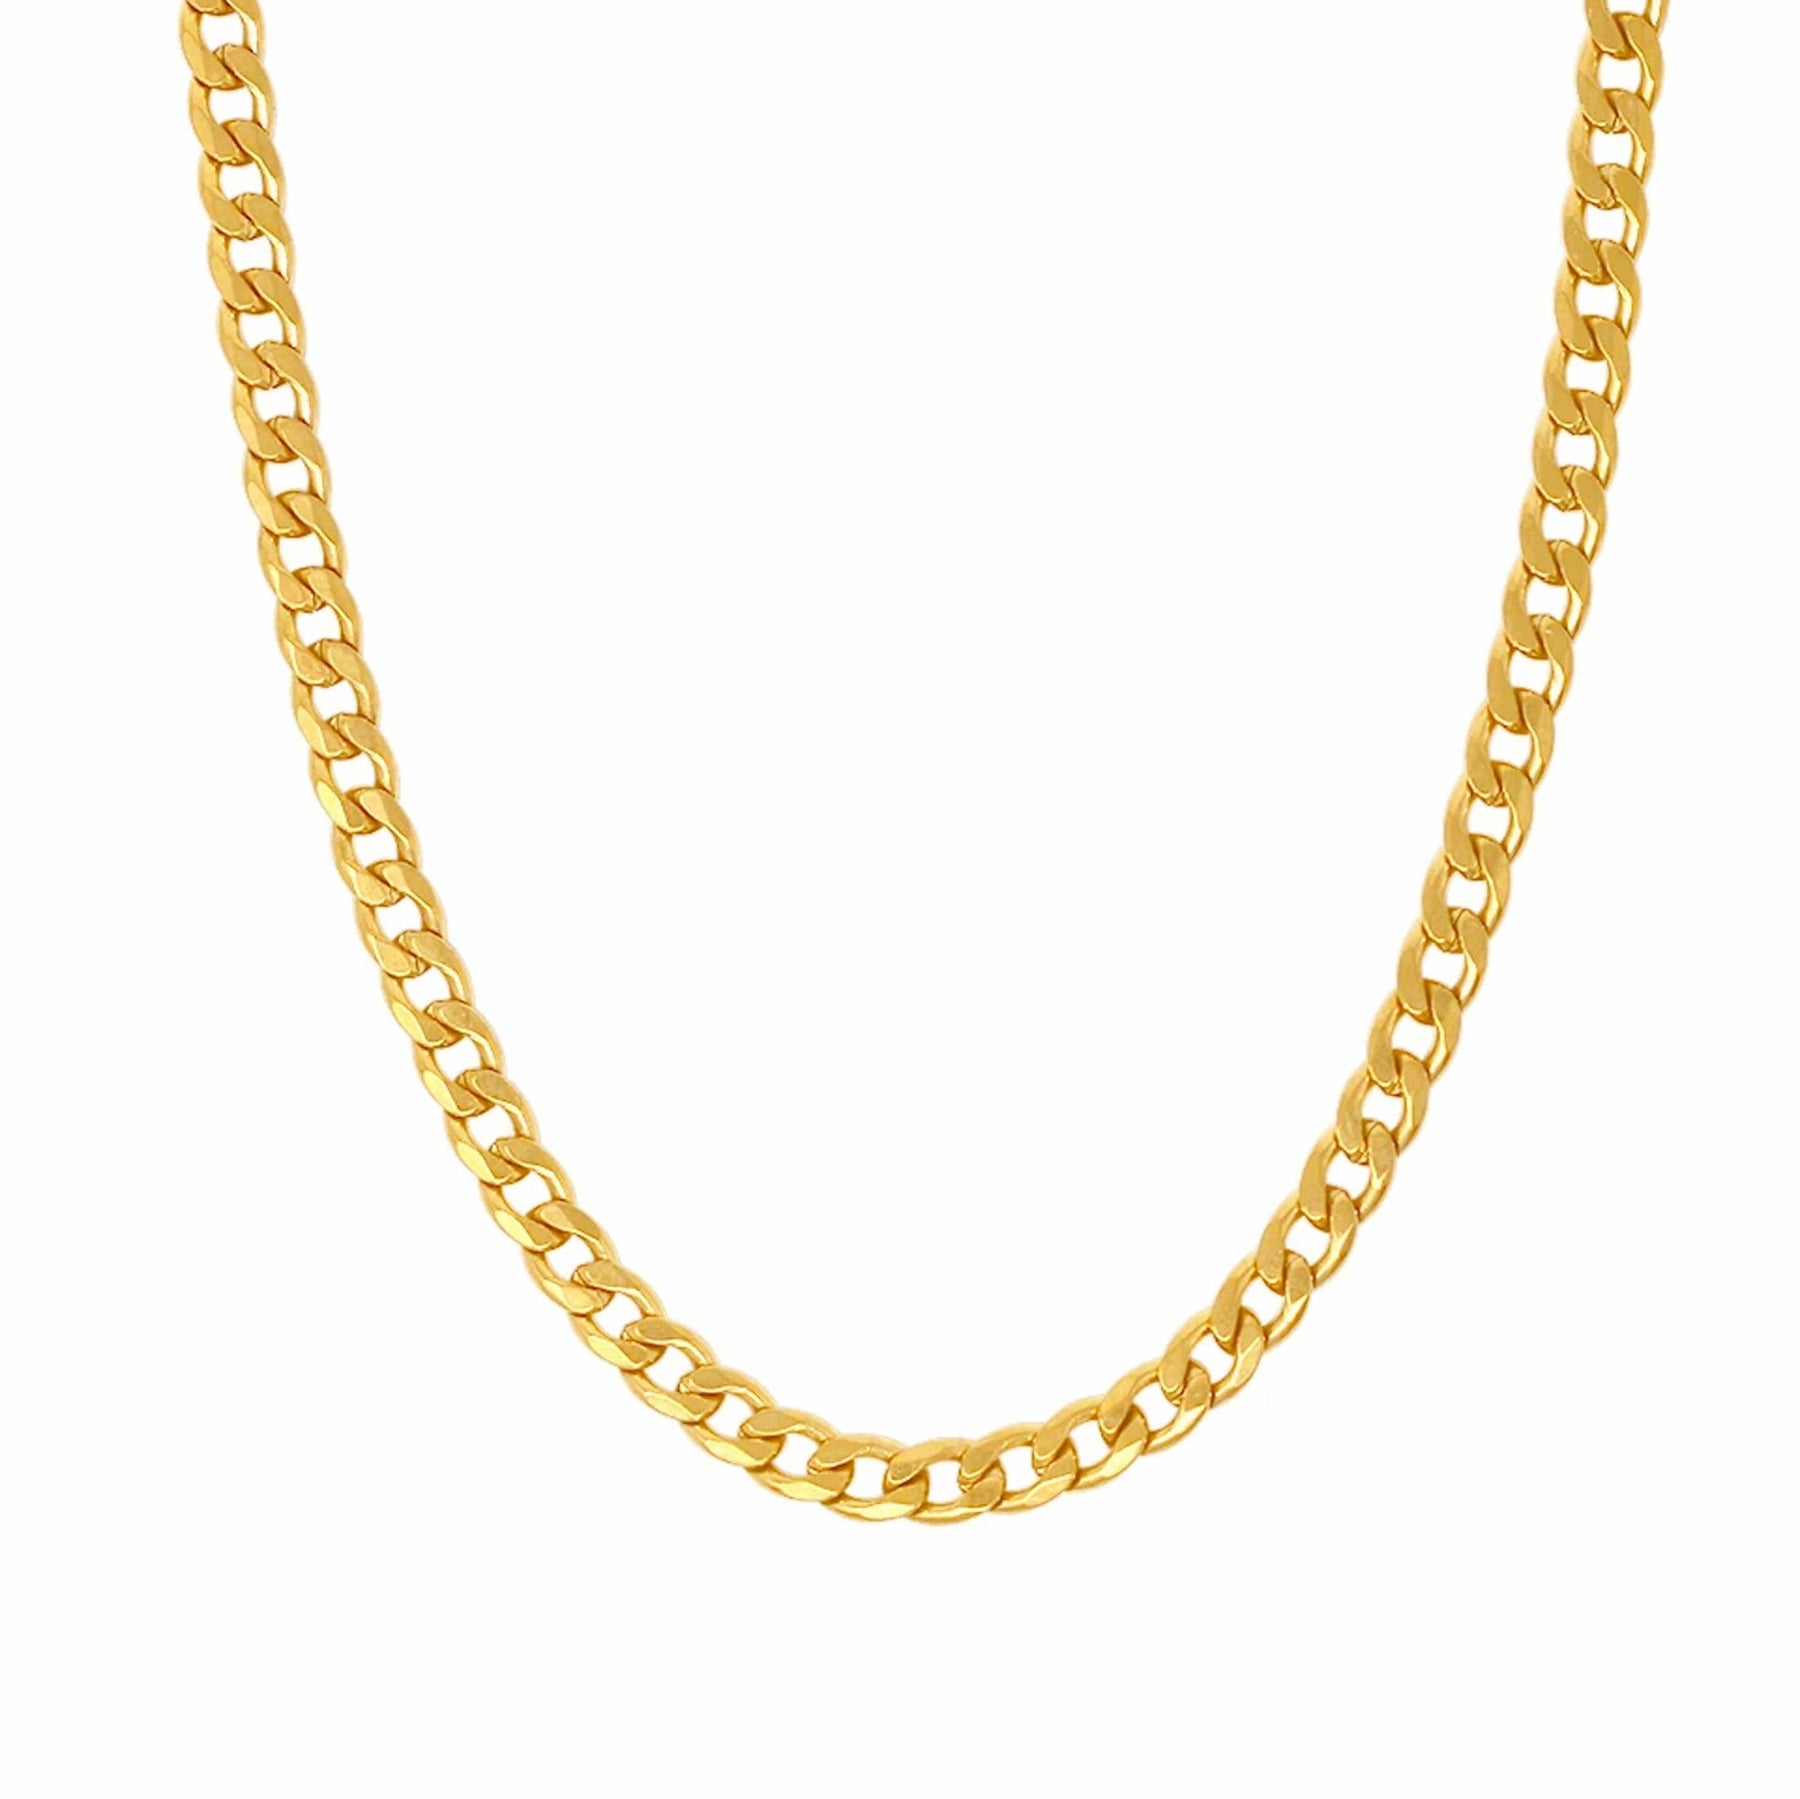 BohoMoon Stainless Steel Amalfi Chain Necklace Gold / Necklace